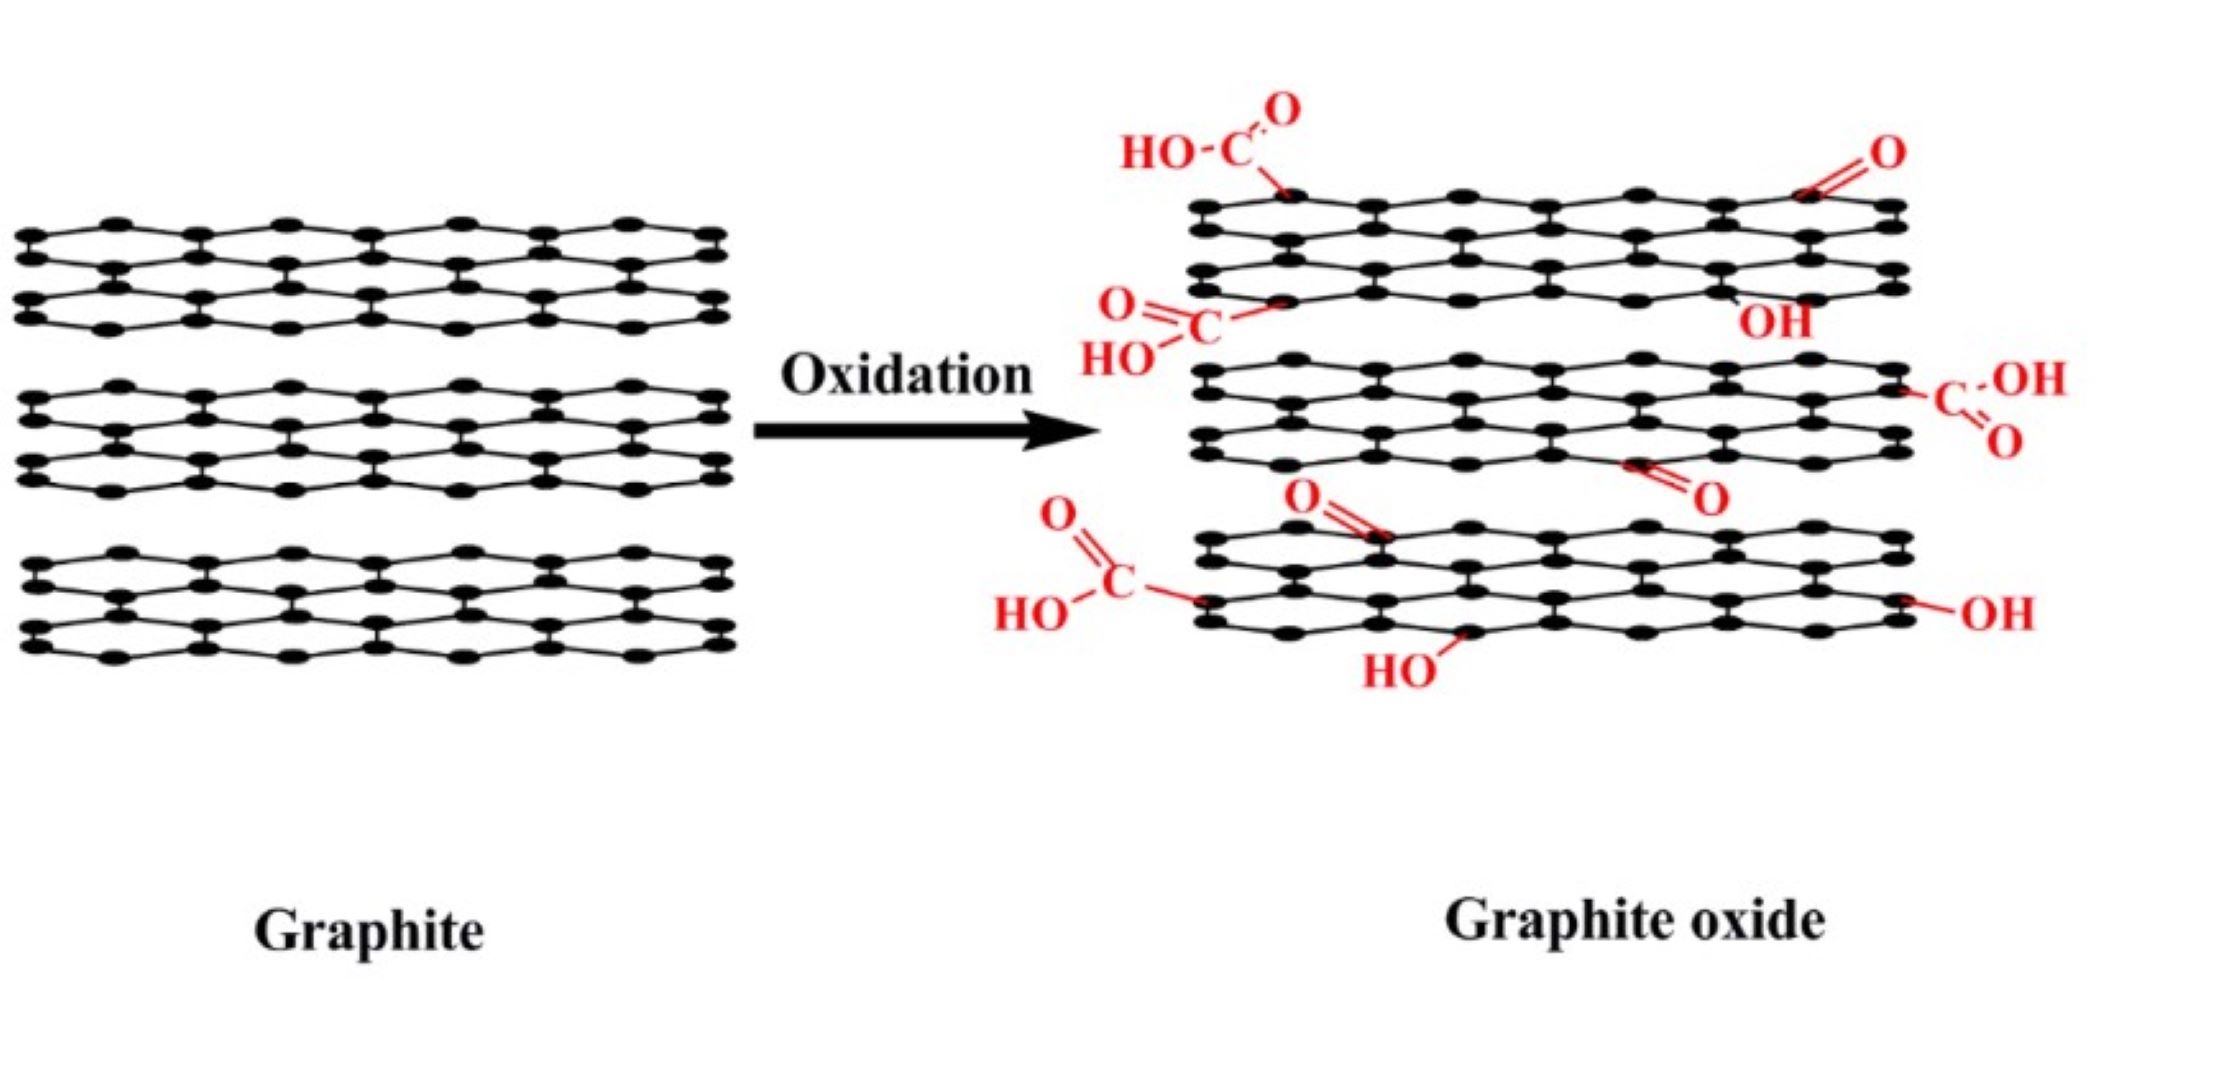 Structure of graphite oxide © Jianchang Li, Xiangqiong Zeng, Tianhui Ren, Emile van der Heide, The Preparation of Graphene Oxide and Its Derivatives and Their Application in Bio-Tribological Systems, Lubricants 2014, 2, 137-161; doi:10.3390/lubricants2030137